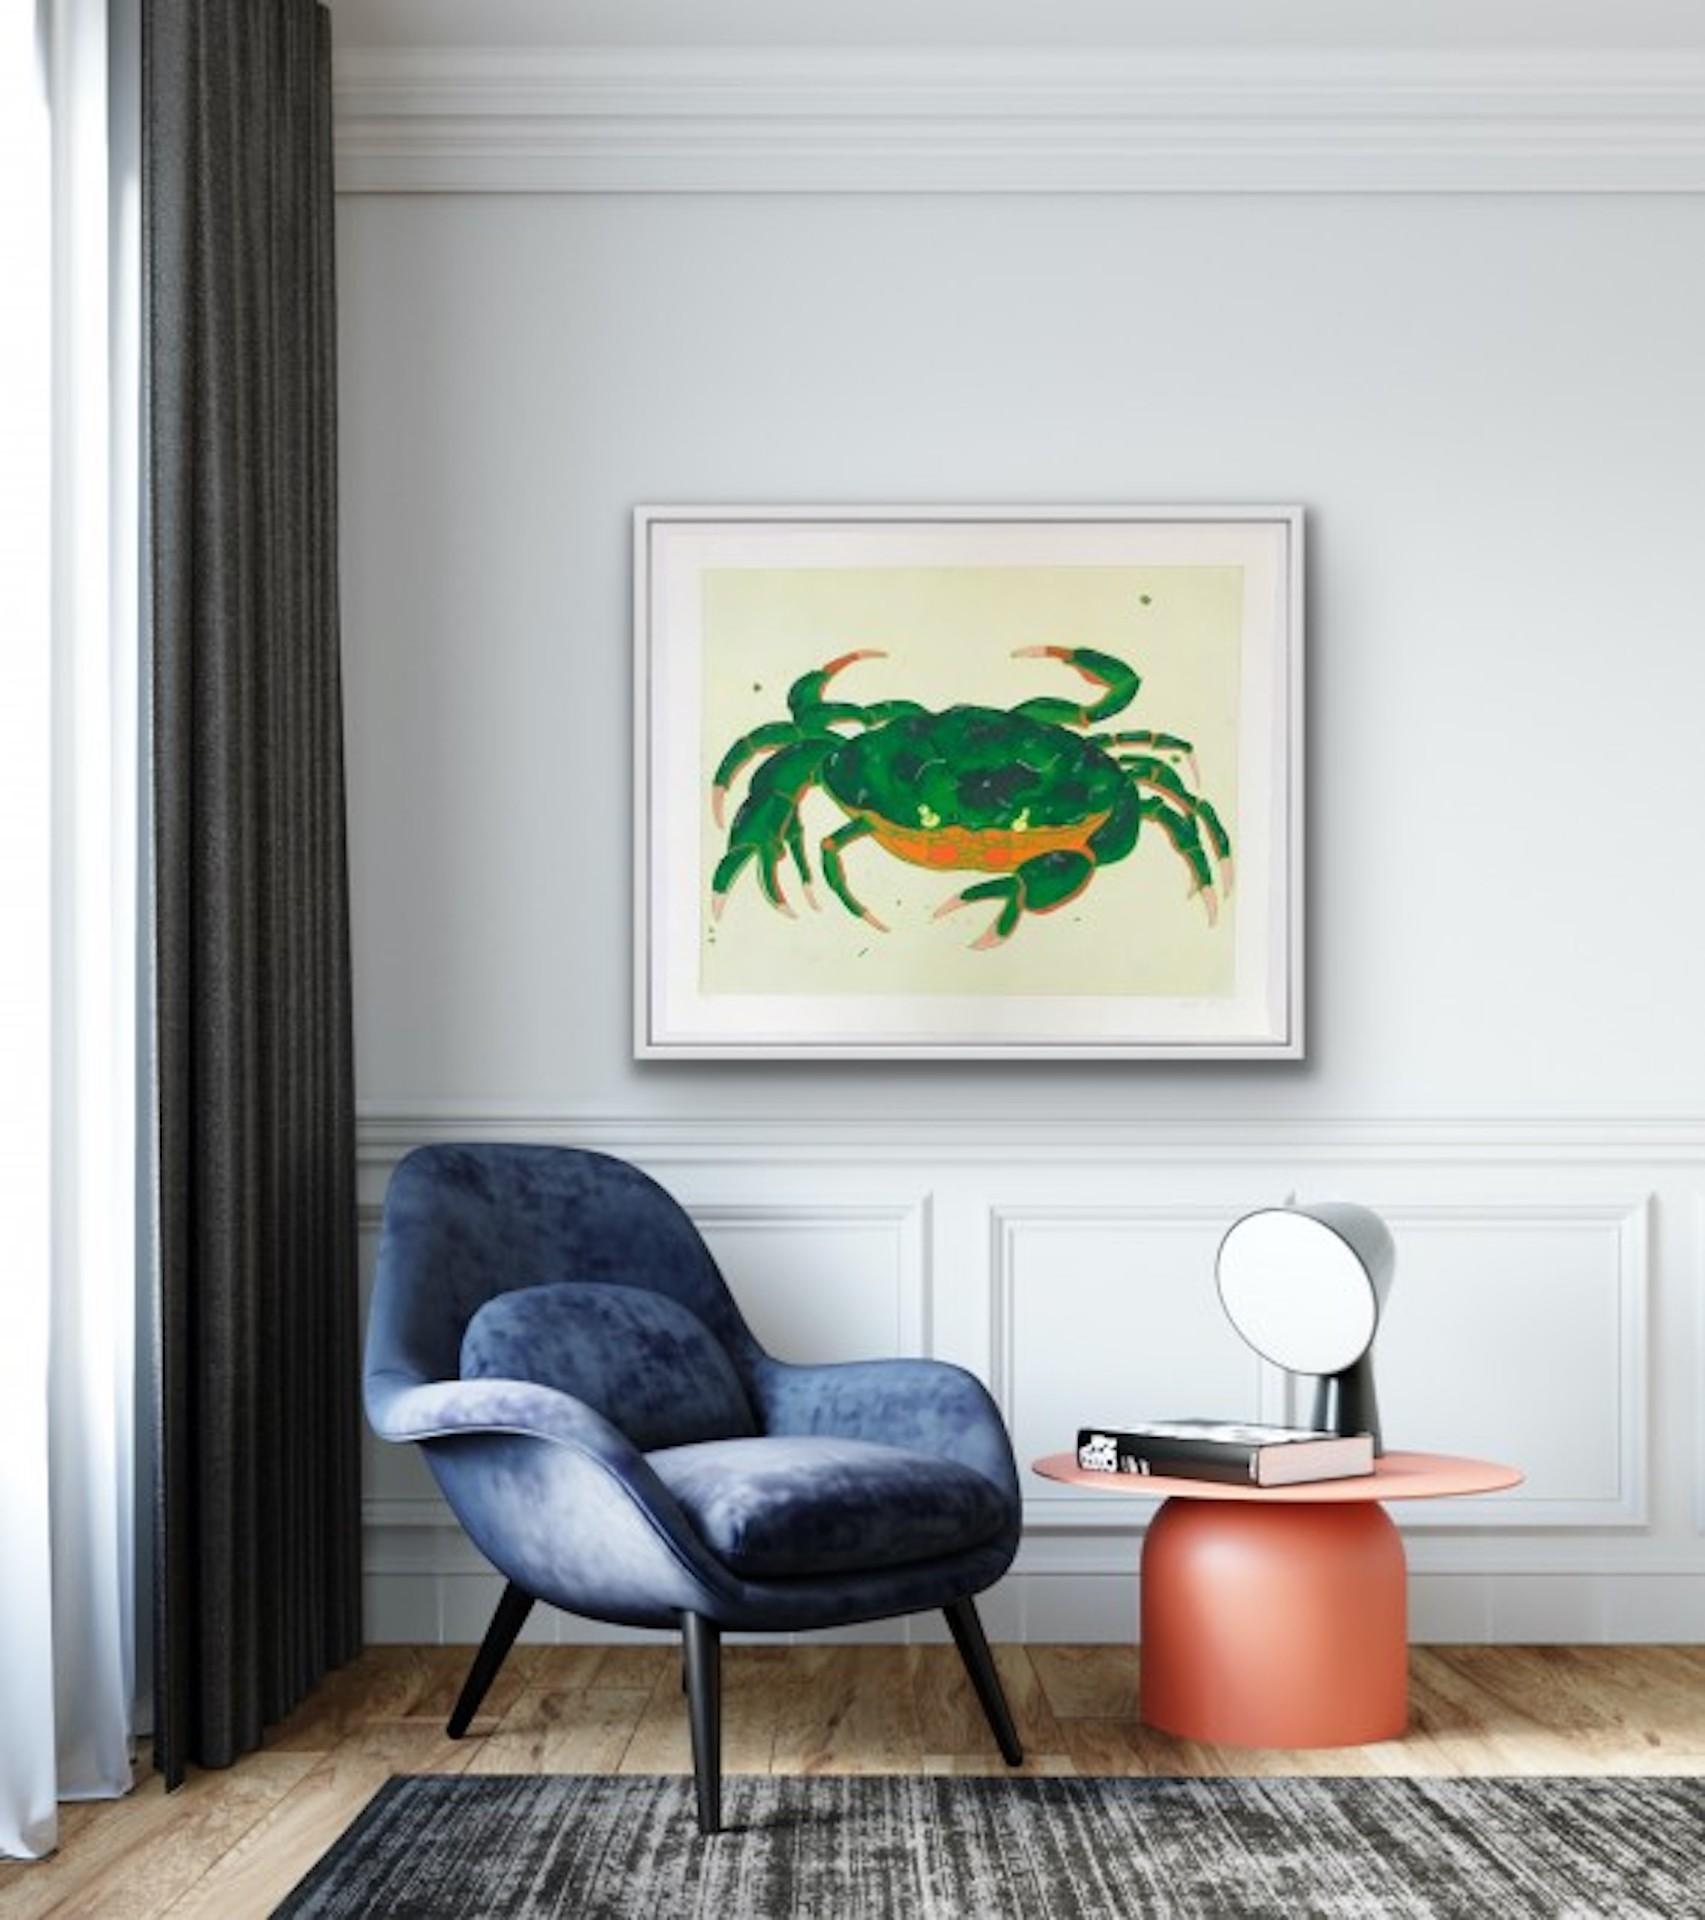 Crab by Kate Boxer [2021]
limited_edition

Drypoint print

Edition number 30

Image size: H:66 cm x W:82 cm

Complete Size of Unframed Work: H:74 cm x W:92.5 cm x D:0.1cm

Sold Unframed

Please note that insitu images are purely an indication of how